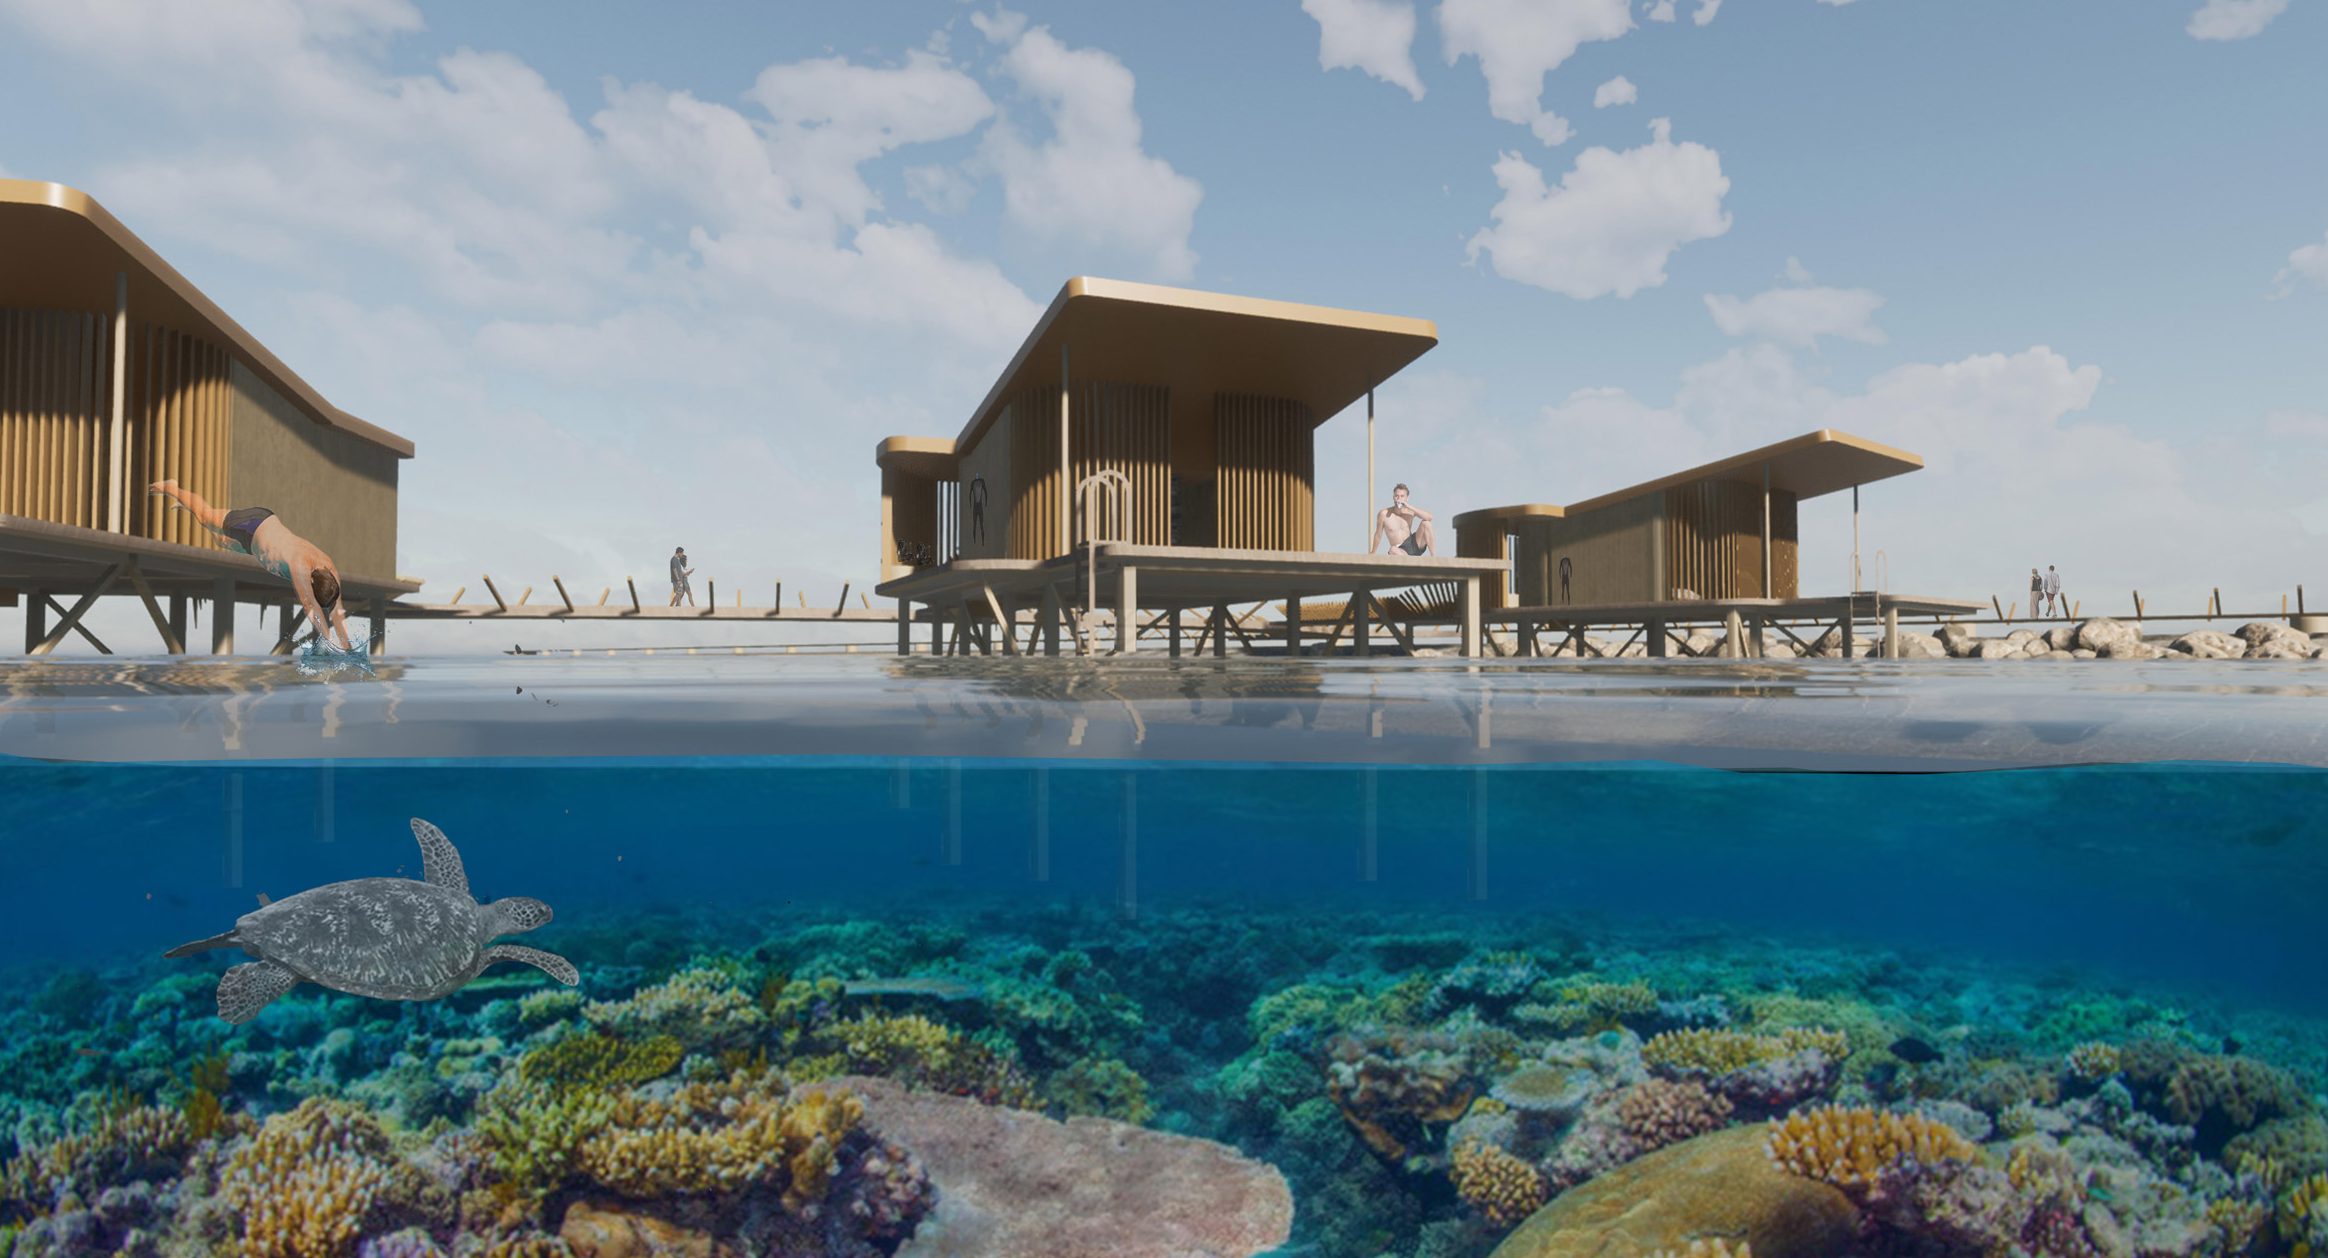 A render of an architectural building sitting above a reef